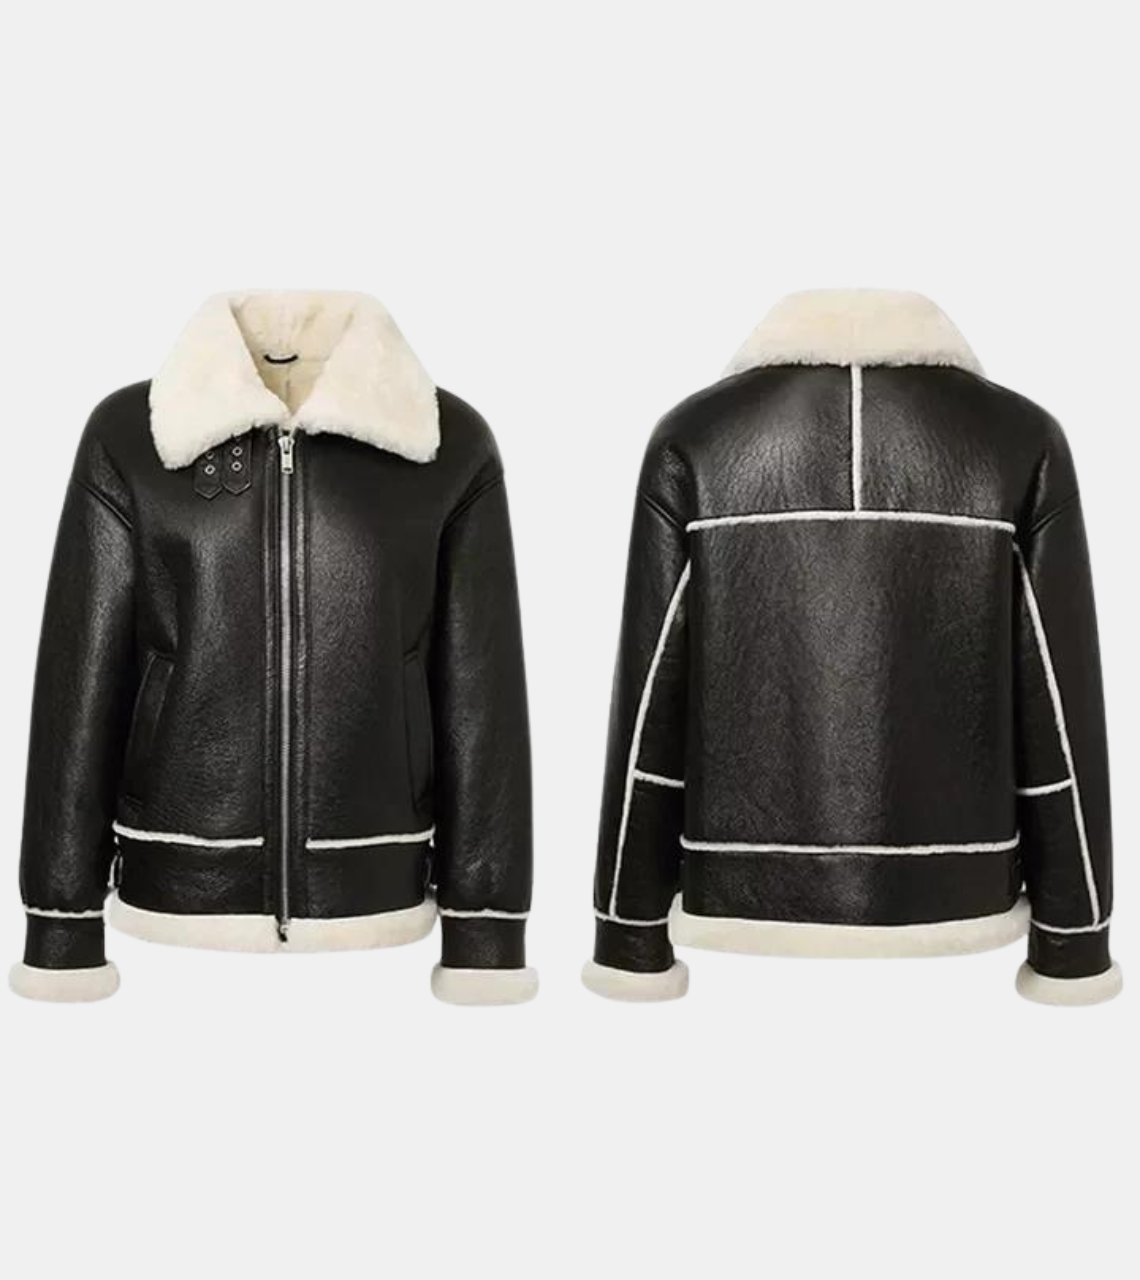 Bomber Women's Shearling Leather Jacket